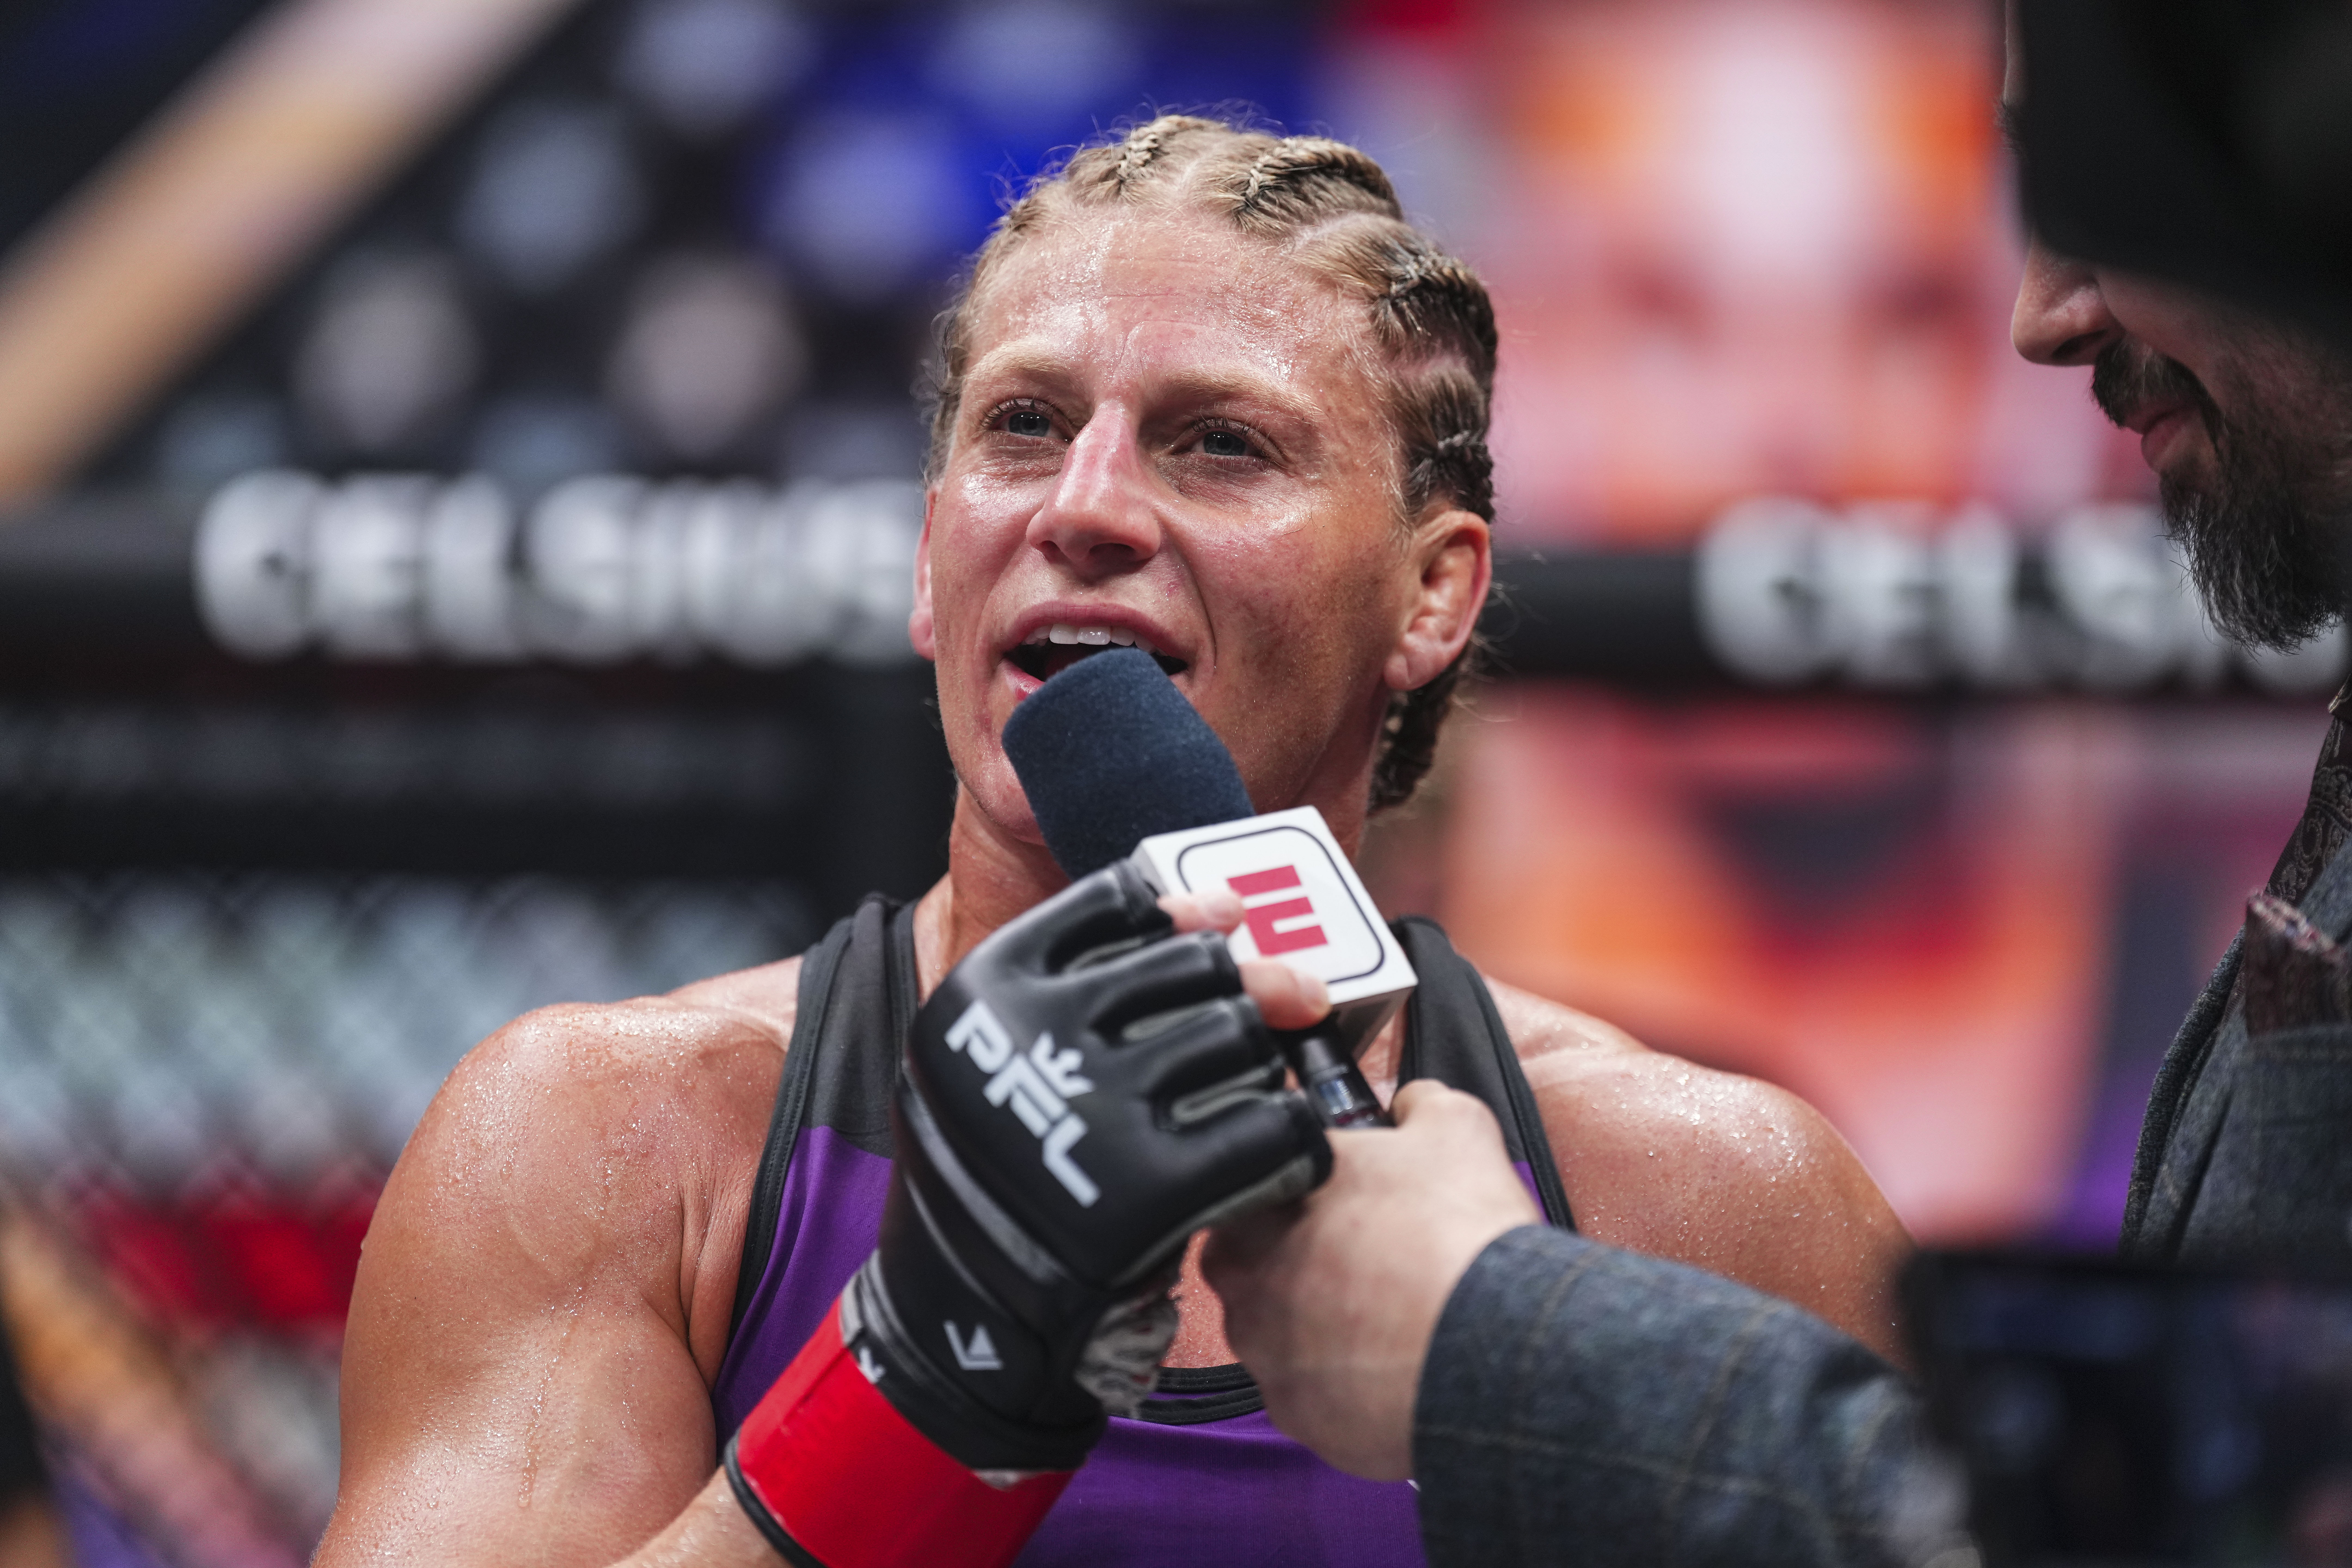 Kayla Harrison signs with UFC and will debut at UFC 300 against Holly Holm